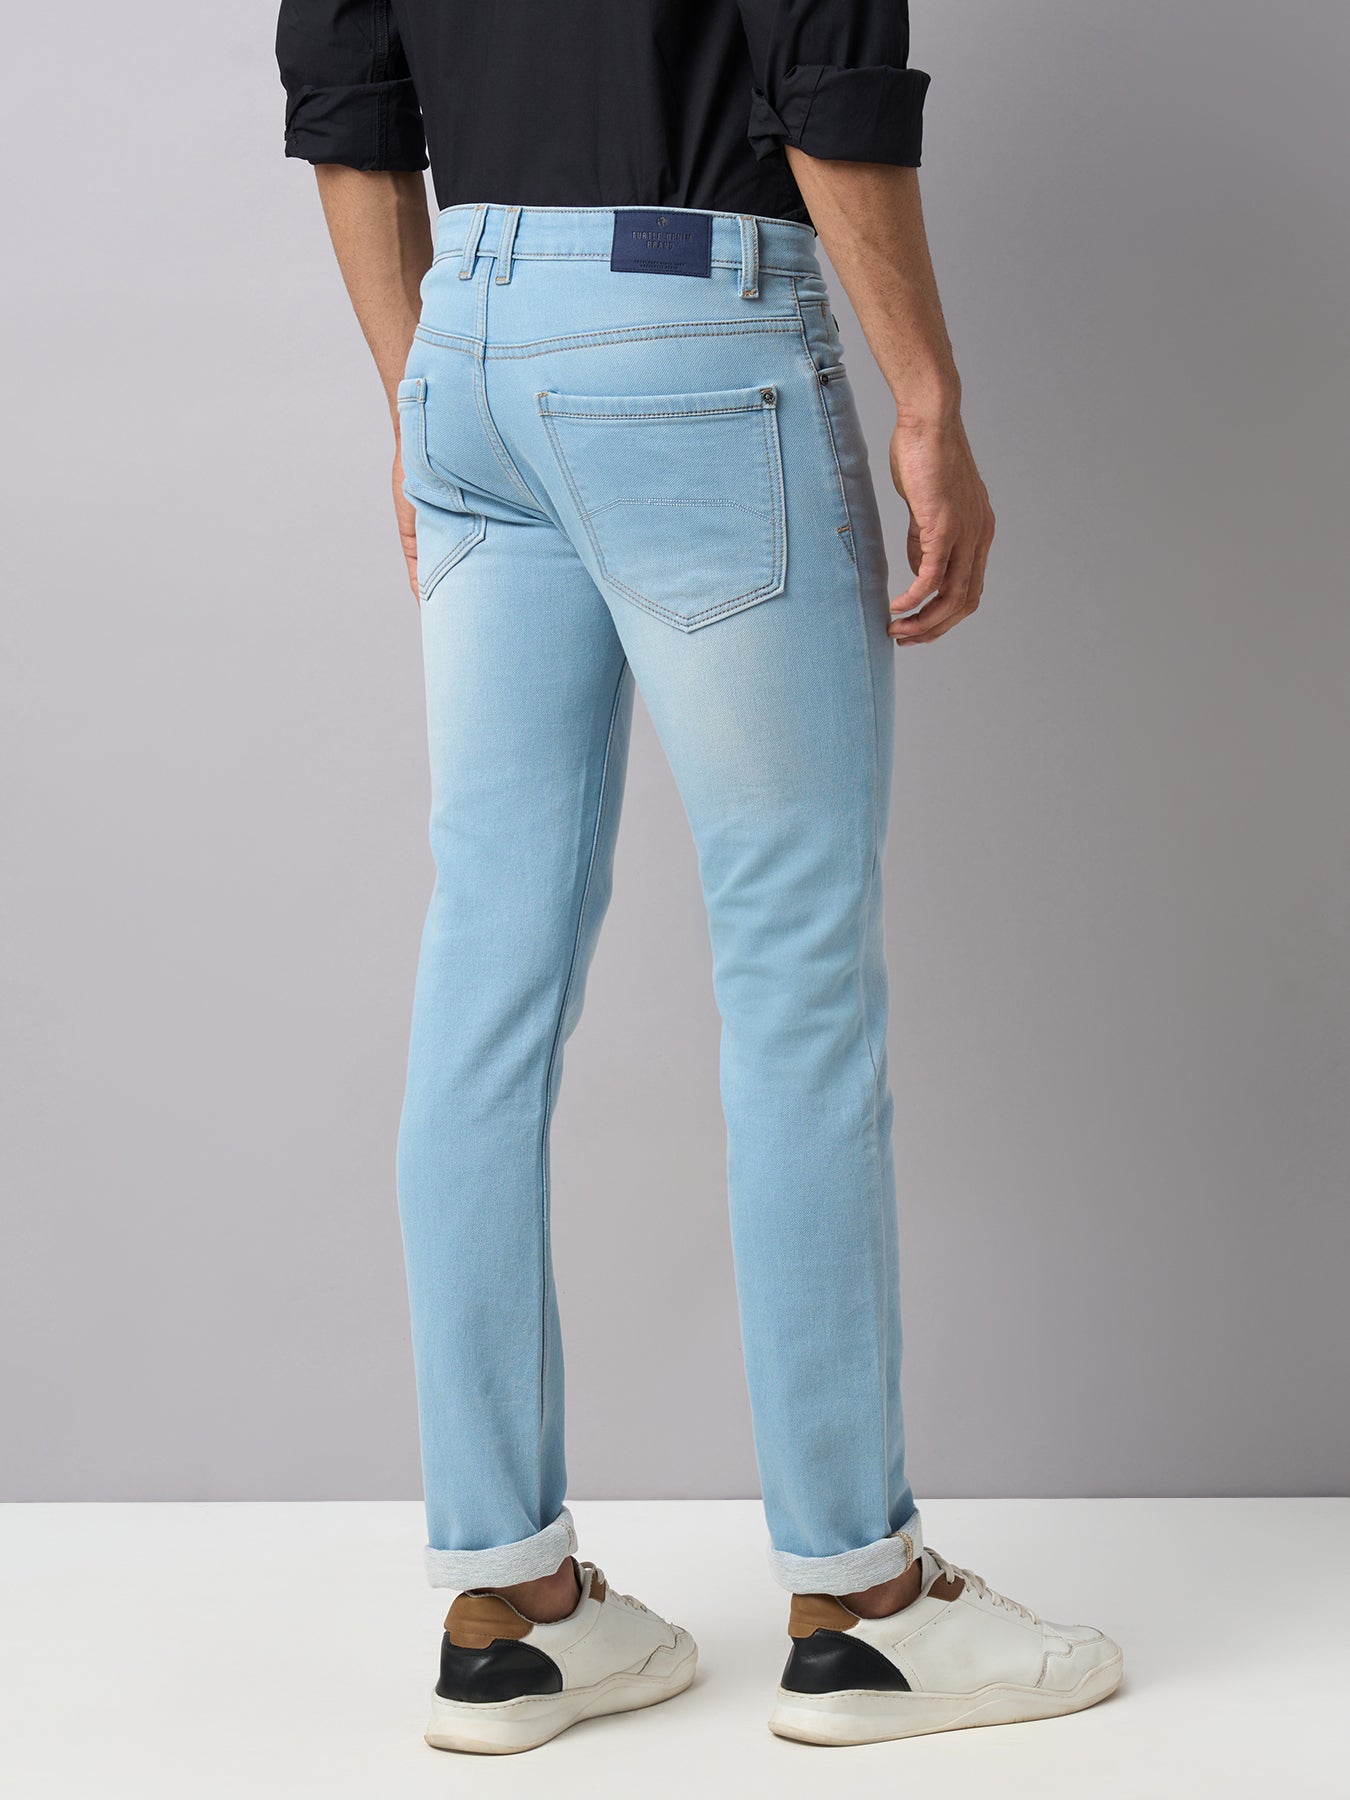 Cotton Stretch Ice Blue Plain Narrow Fit Flat Front Casual Jeans